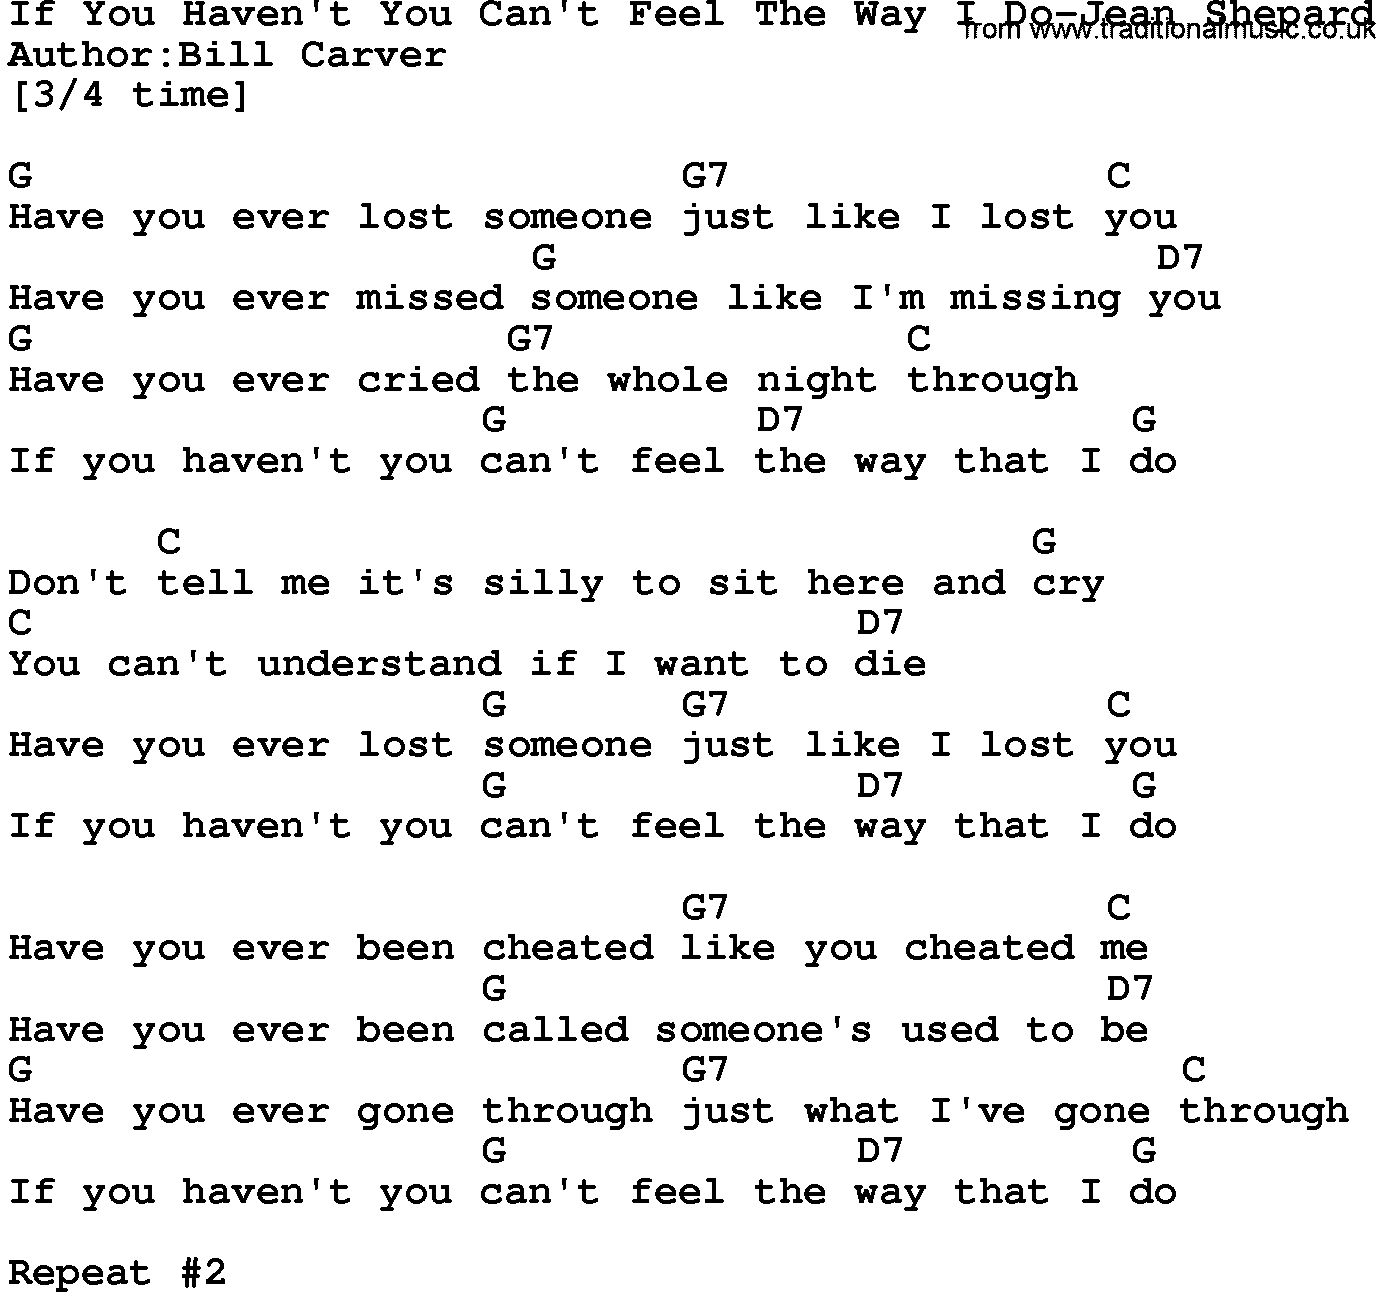 Country music song: If You Haven't You Can't Feel The Way I Do-Jean Shepard lyrics and chords